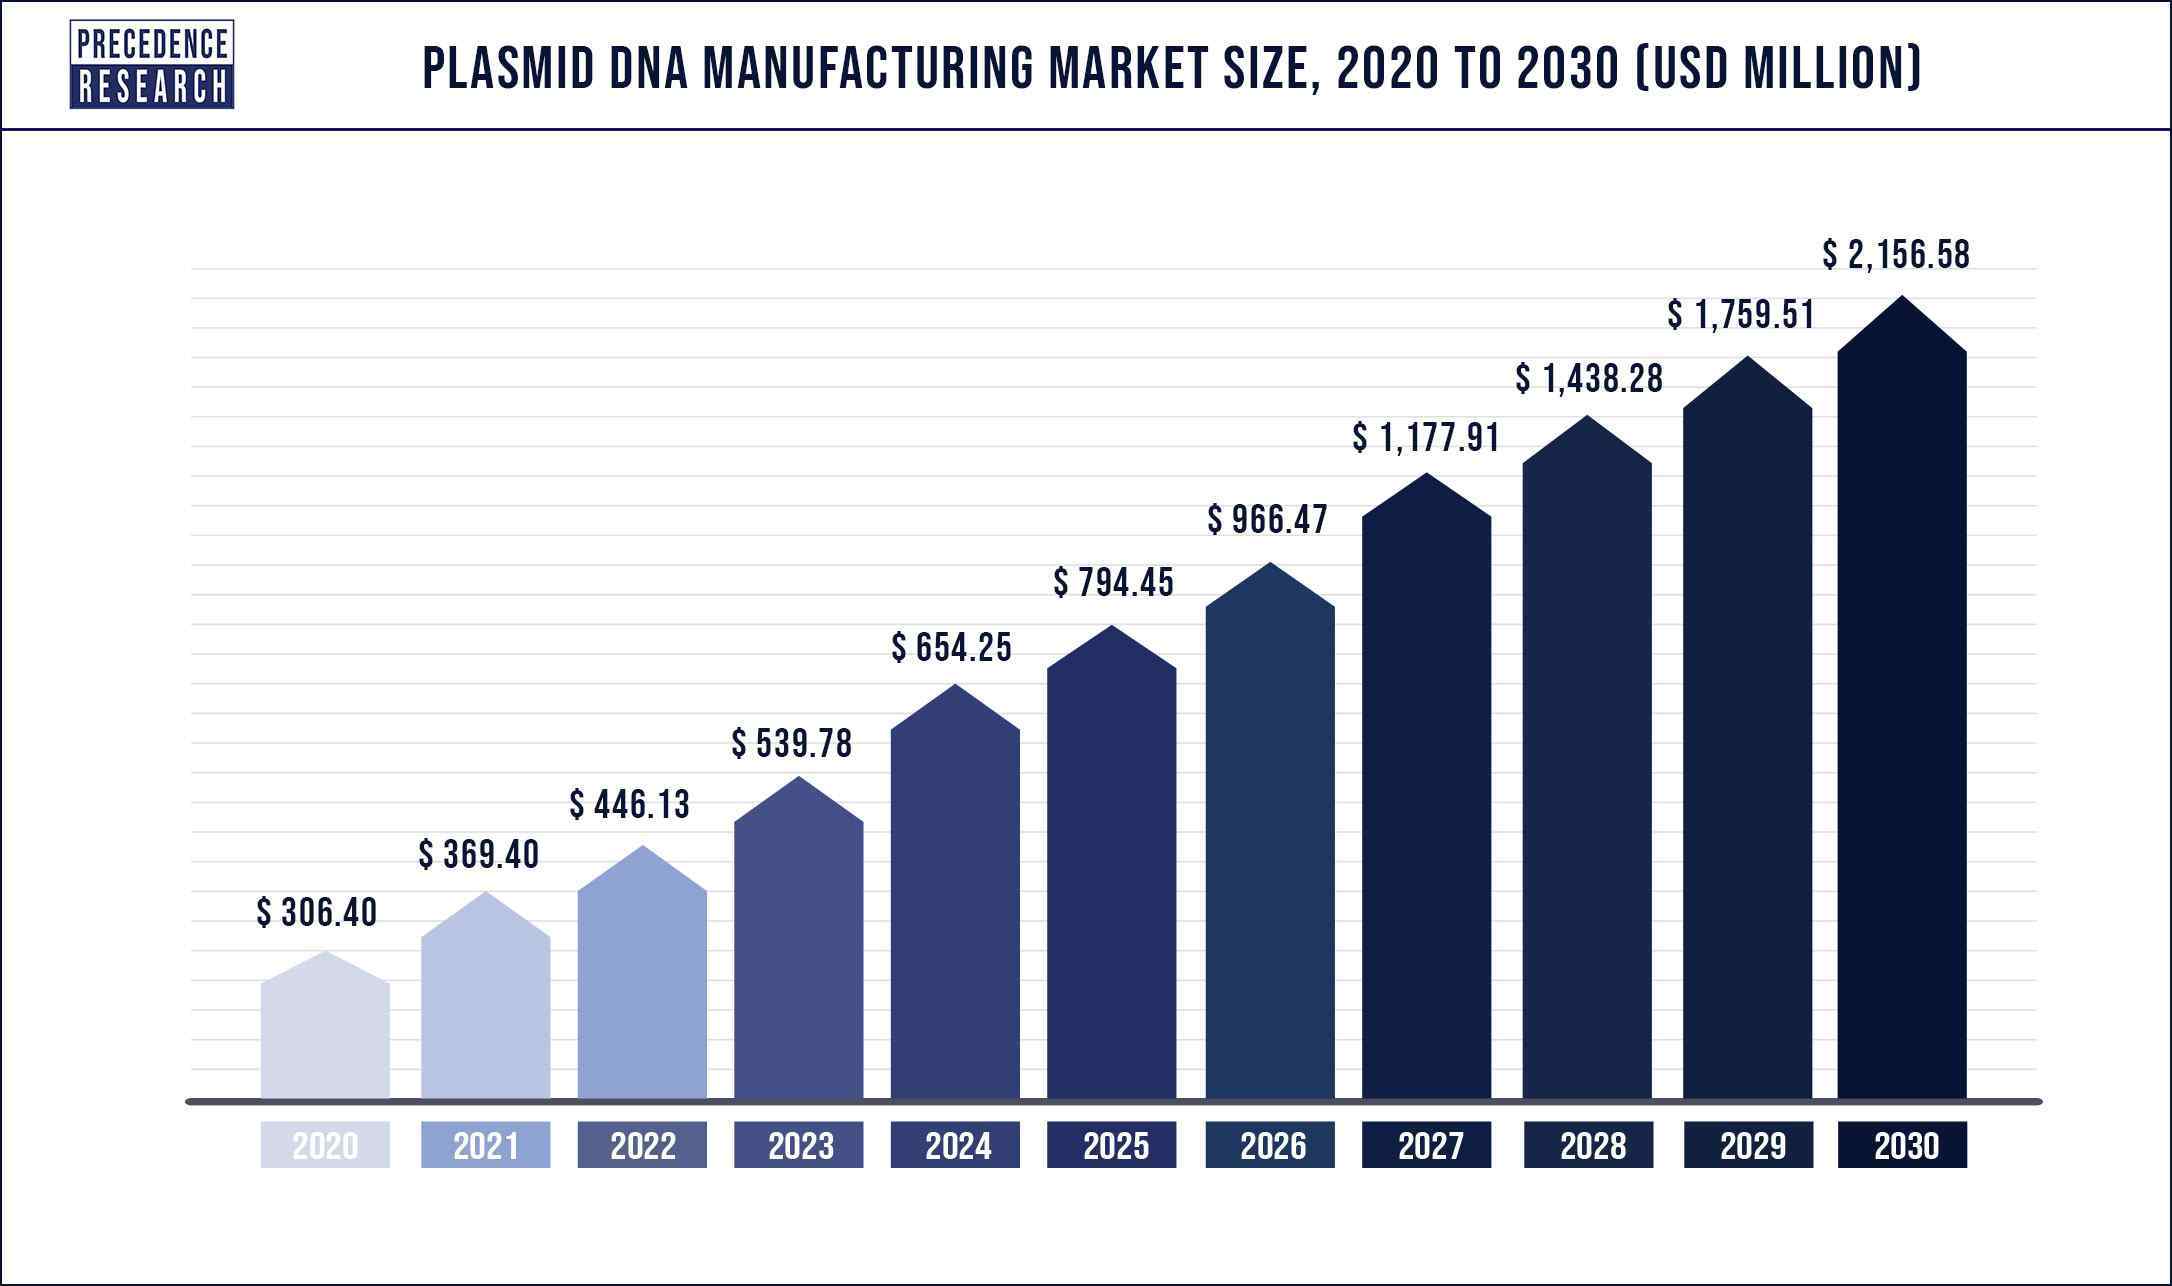 Plasmid DNA Manufacturing Market Size 2020 to 2030